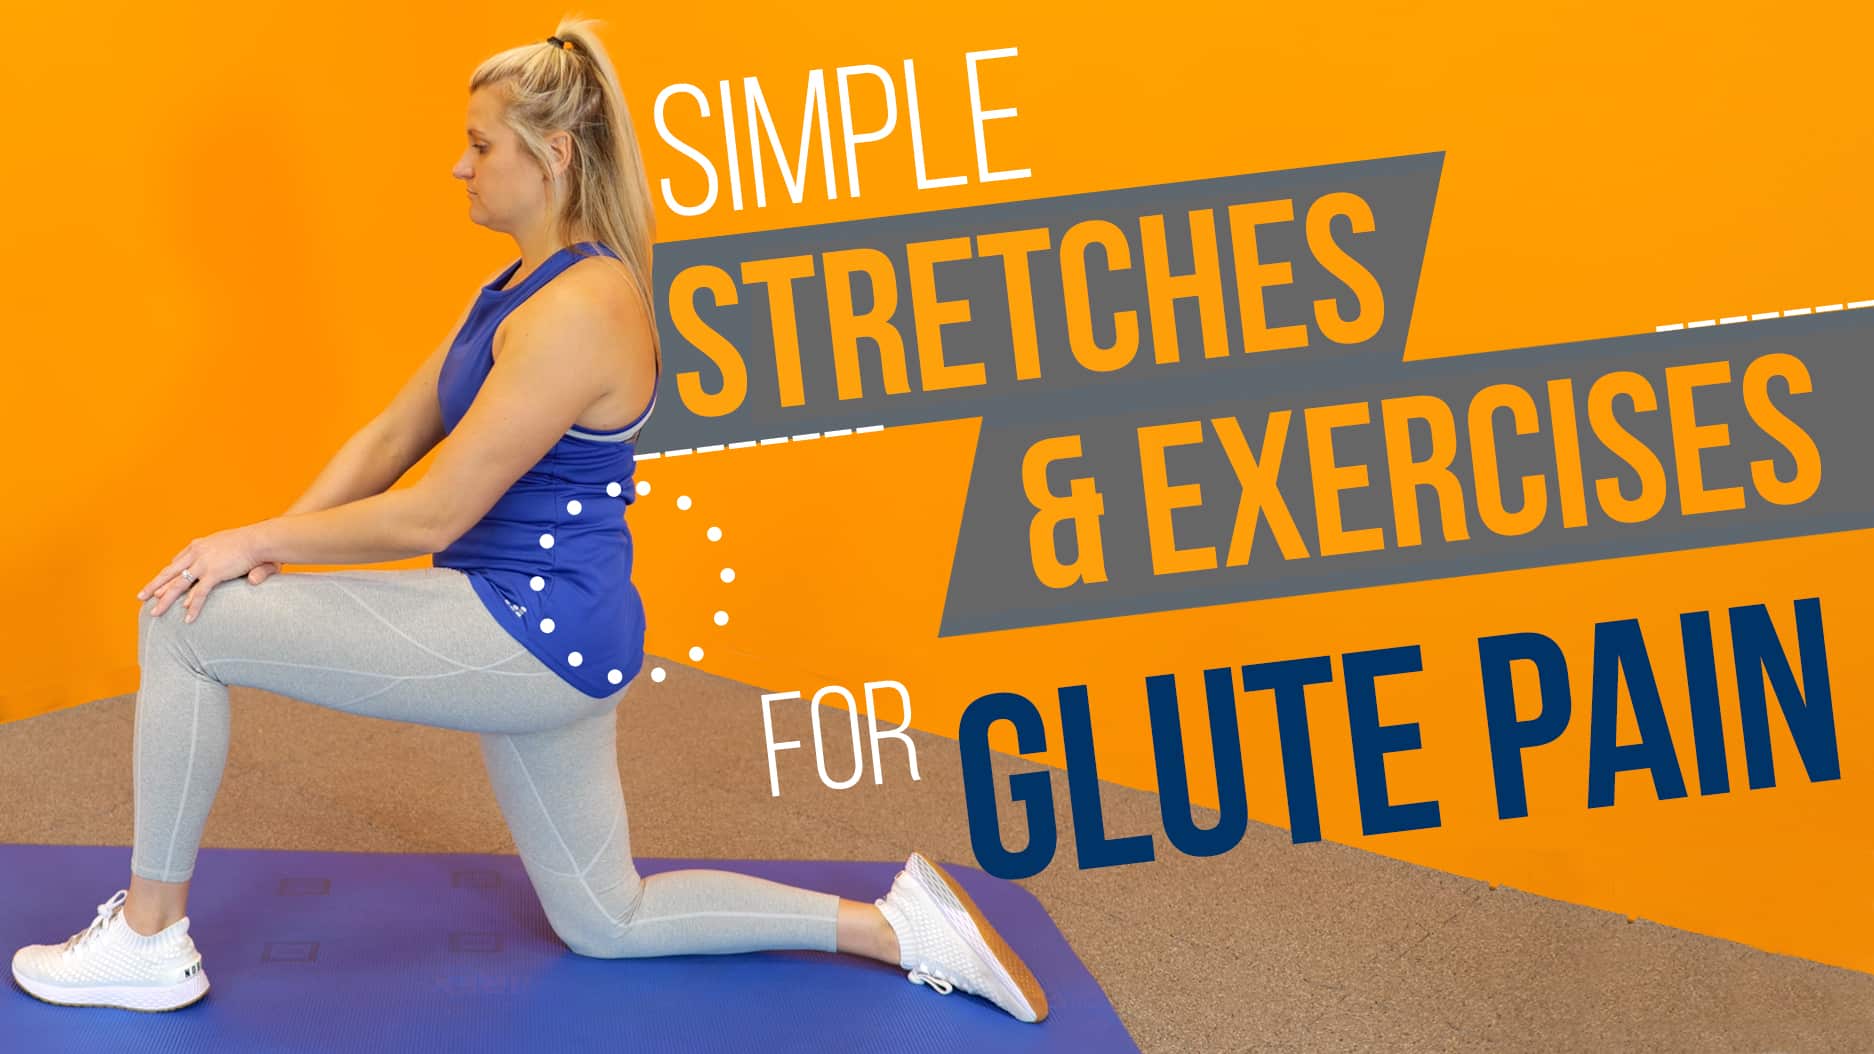 Exercises and Stretches to Relieve Glute Pain